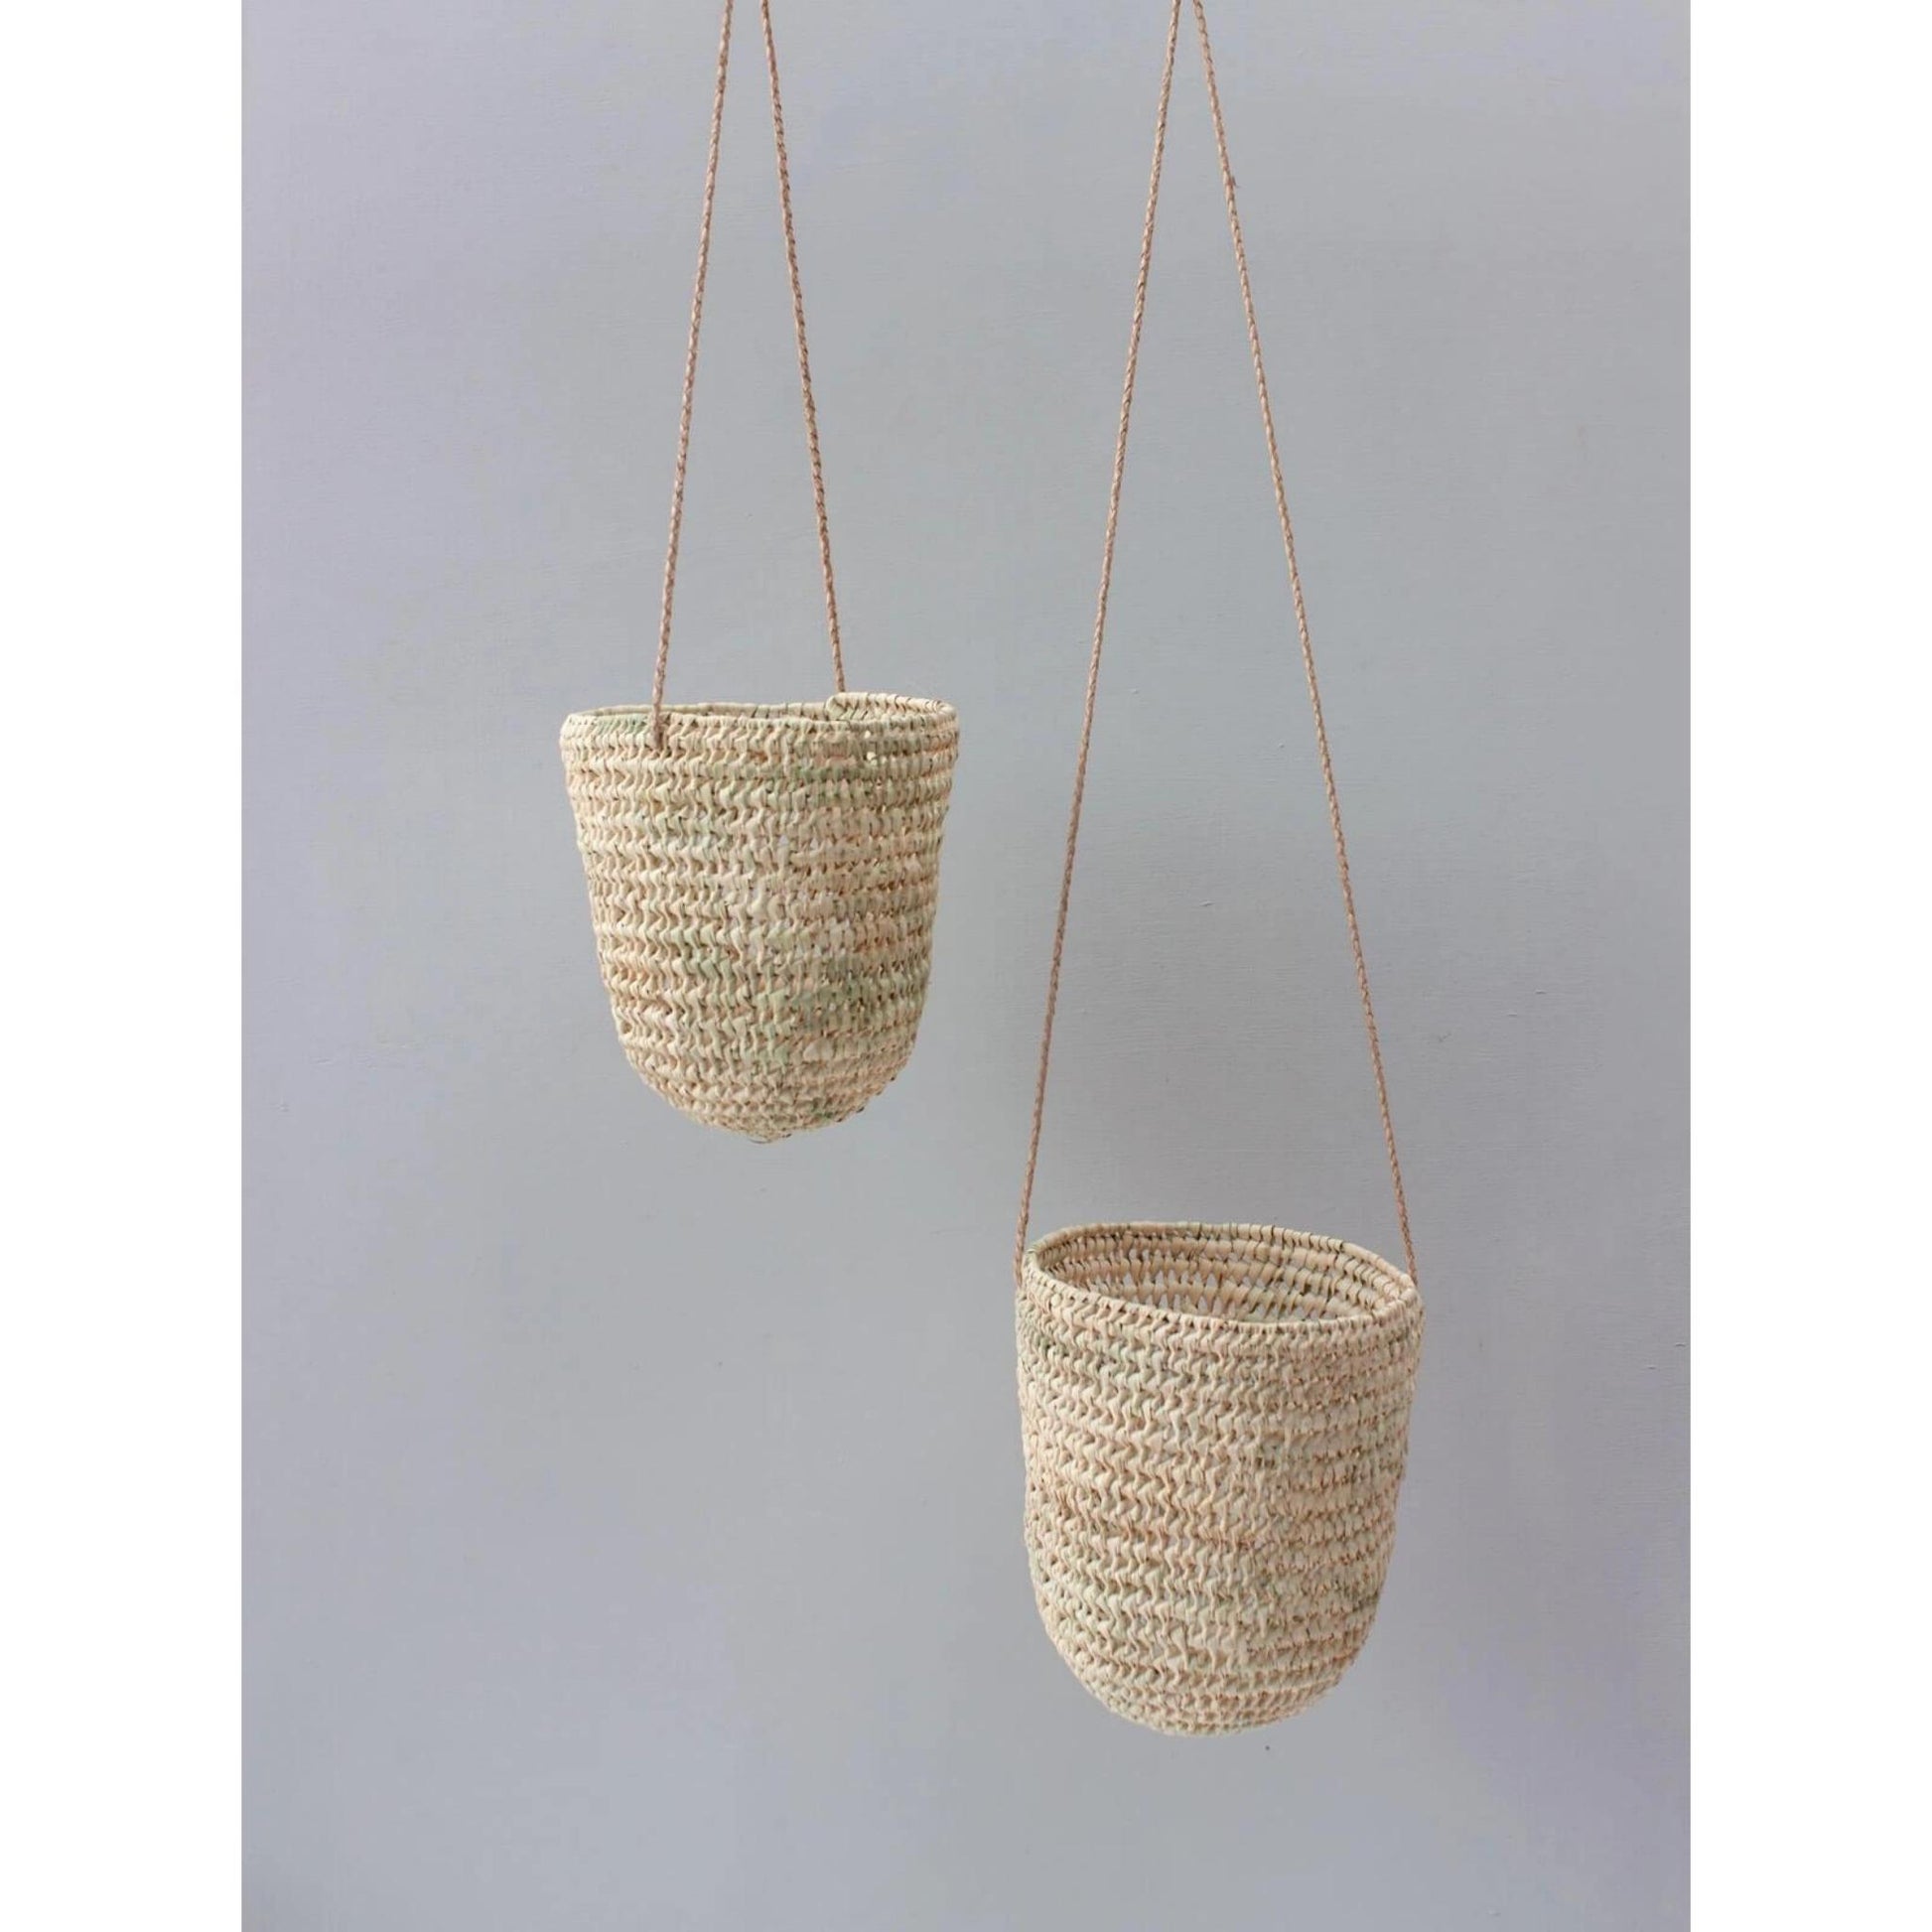 handwoven dome-shaped hanging palm leaf basket with braided leather strap shown in small and large